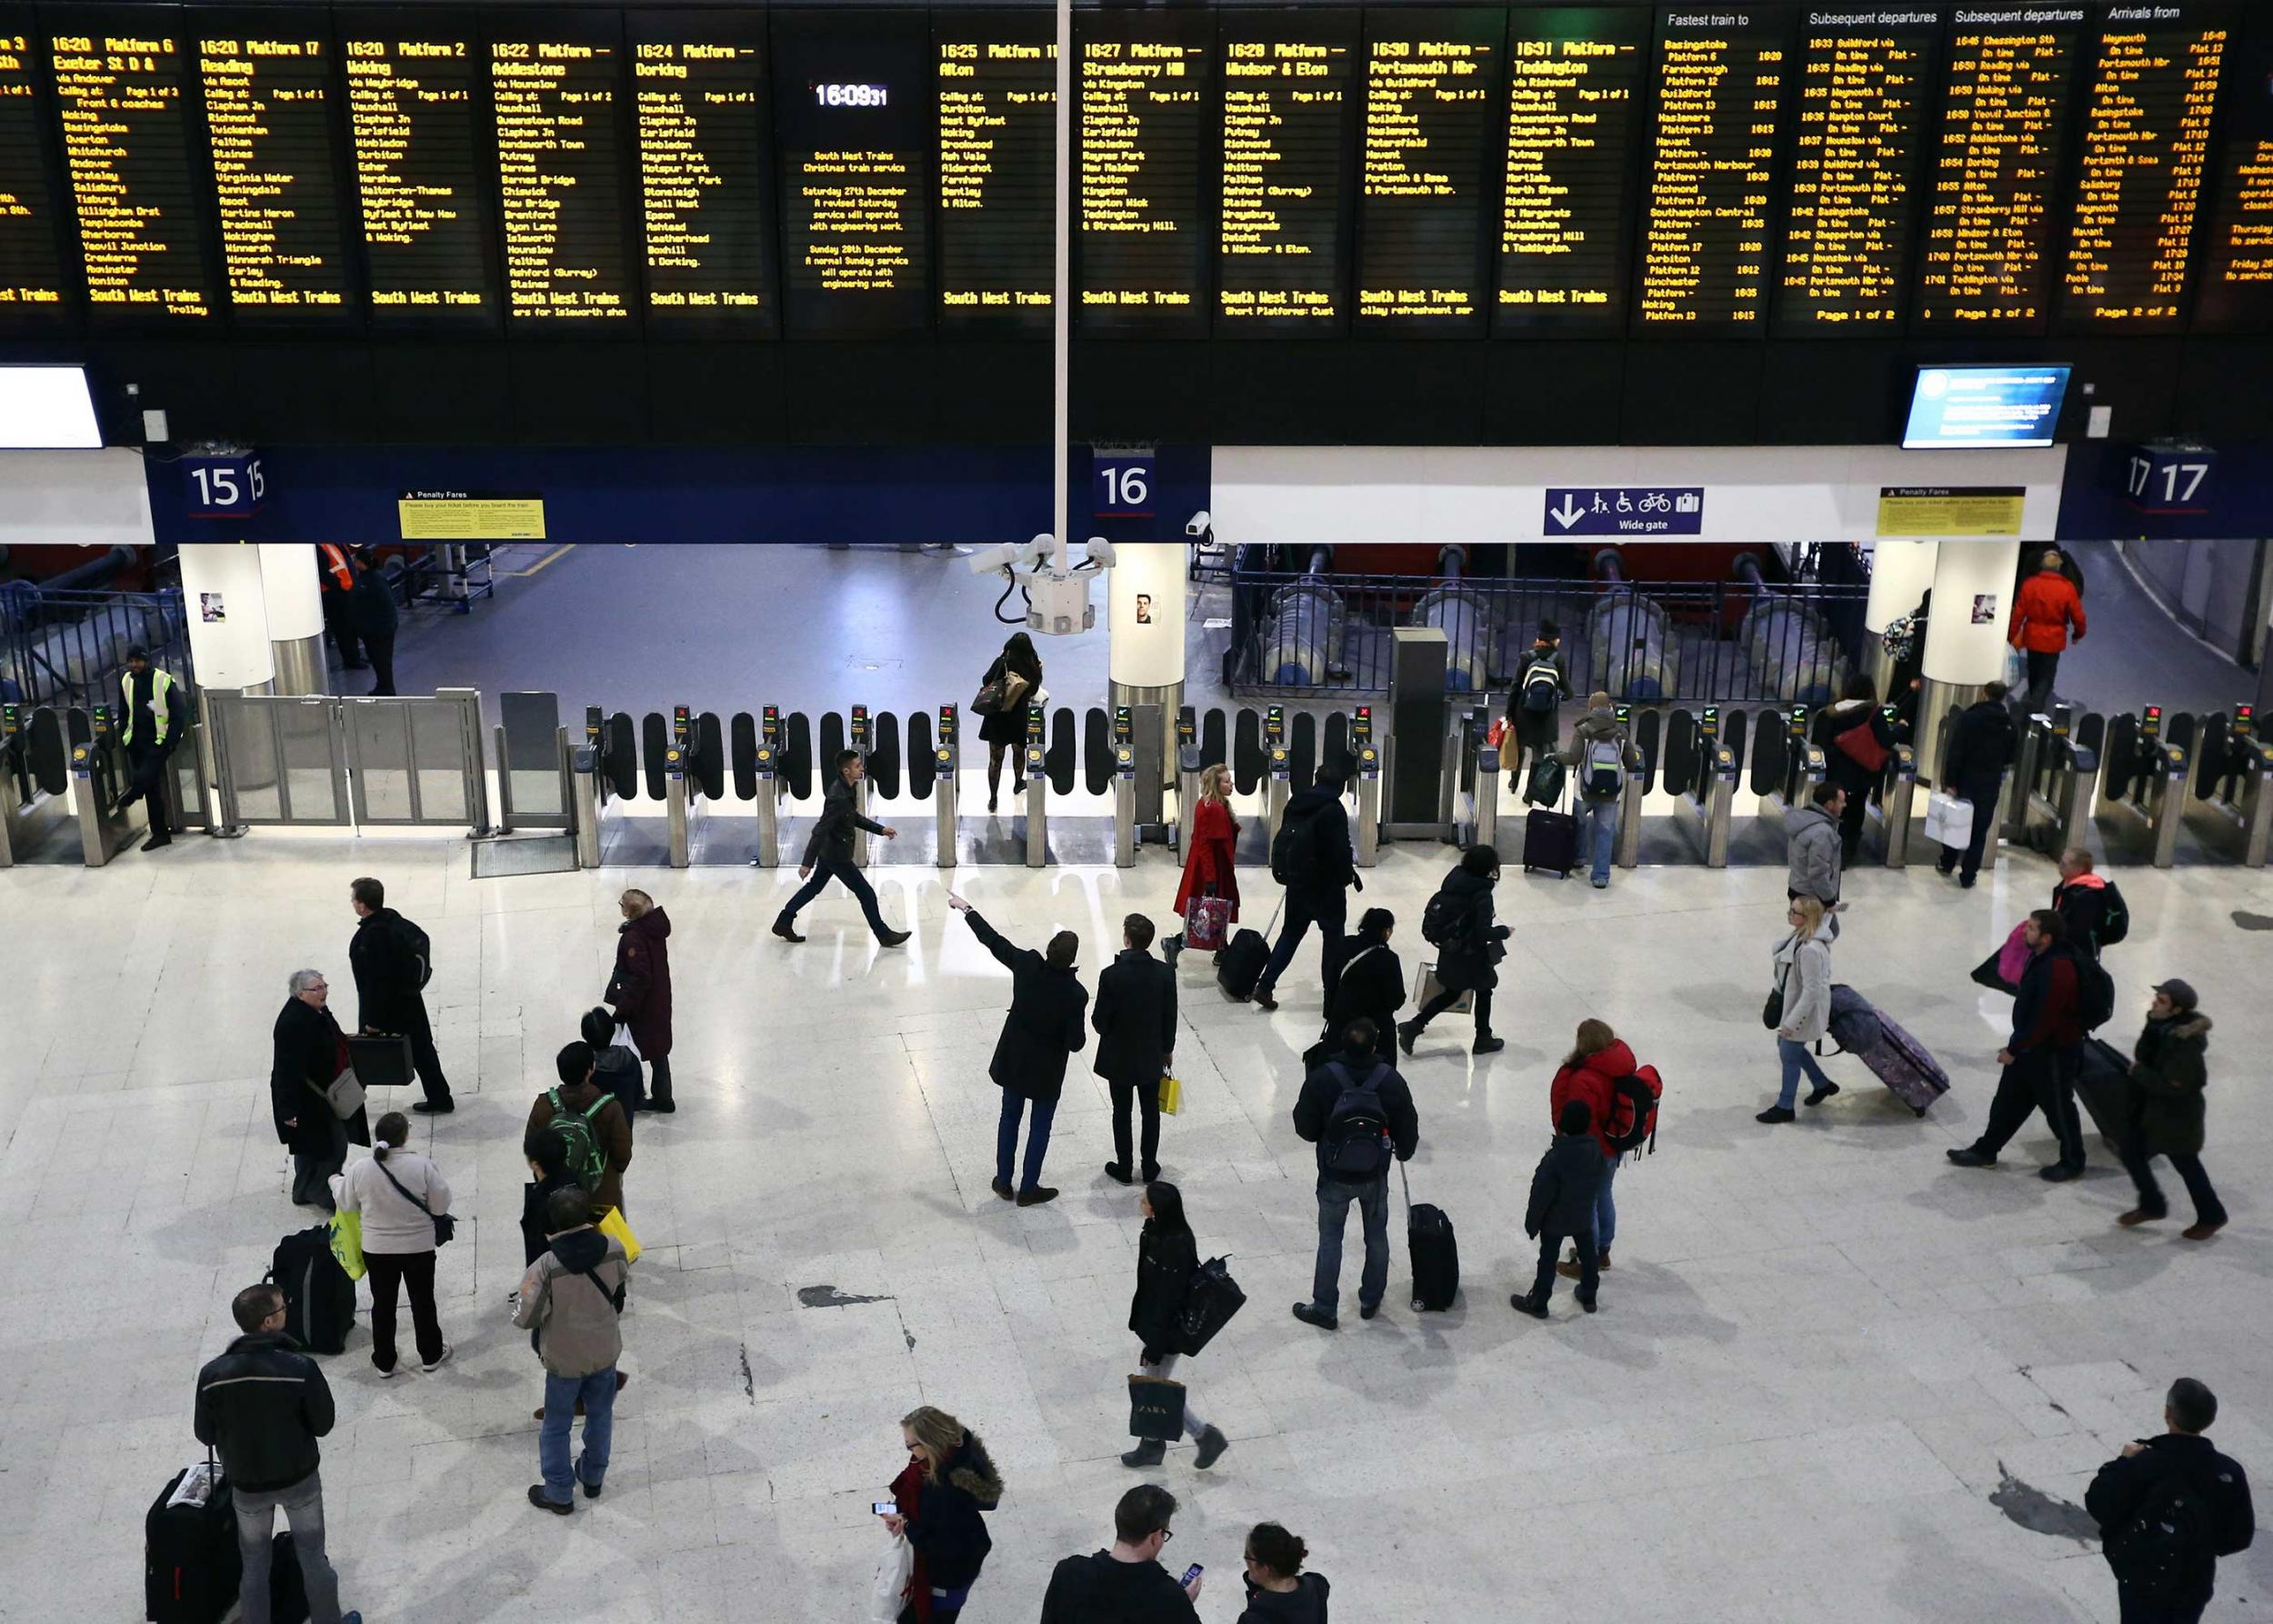 The alleged incident occurred at London's Waterloo station